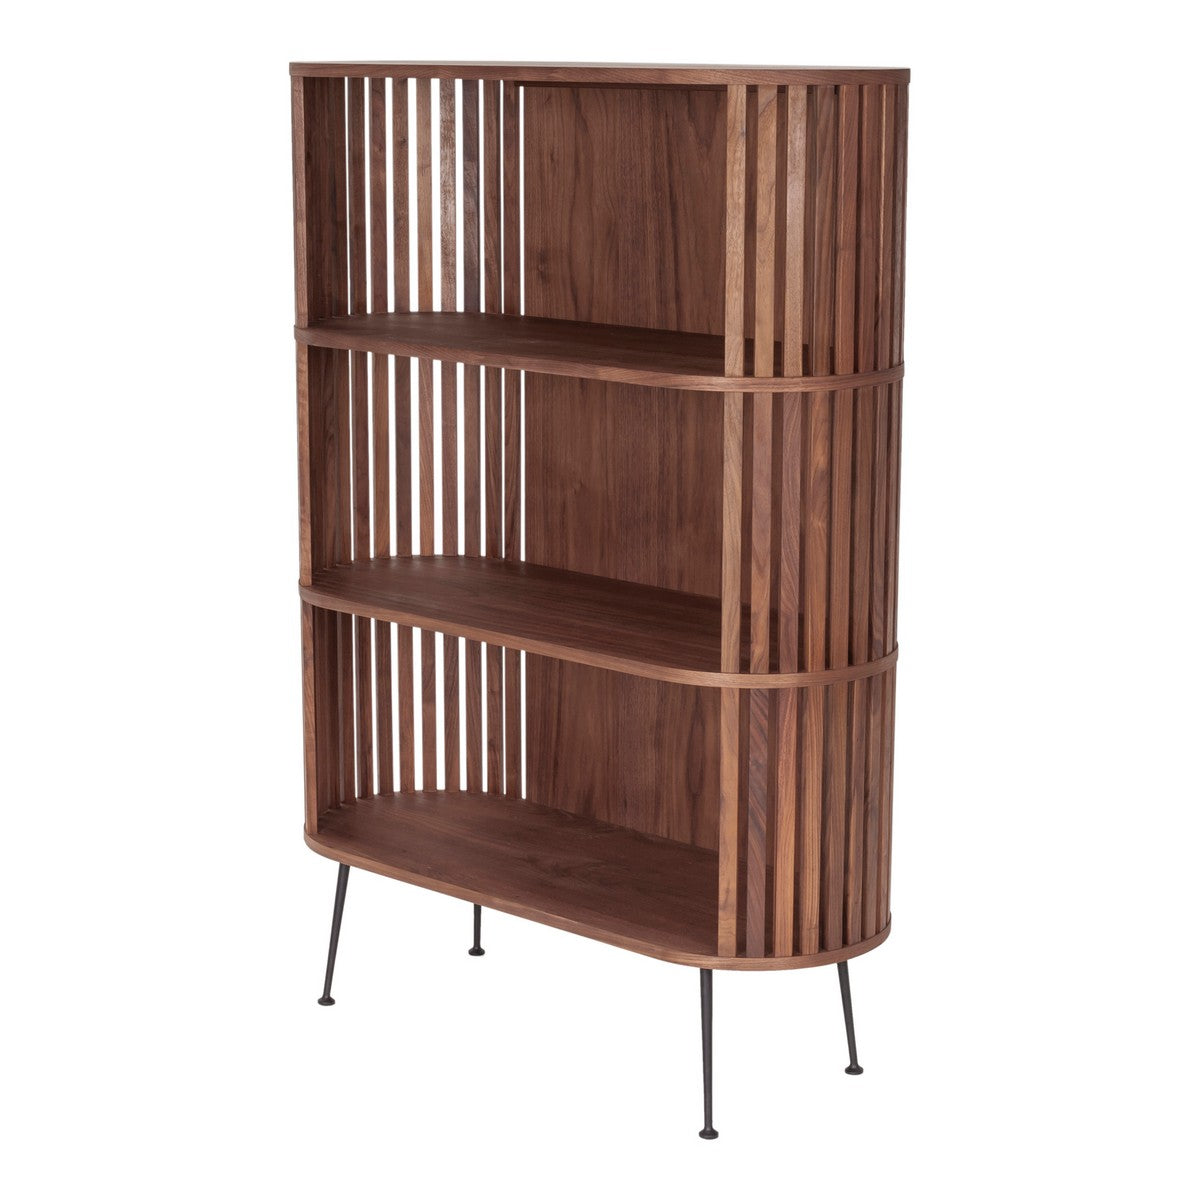 Moe's Home Collection Henrich Bookshelf Natural Oil - YC-1024-21